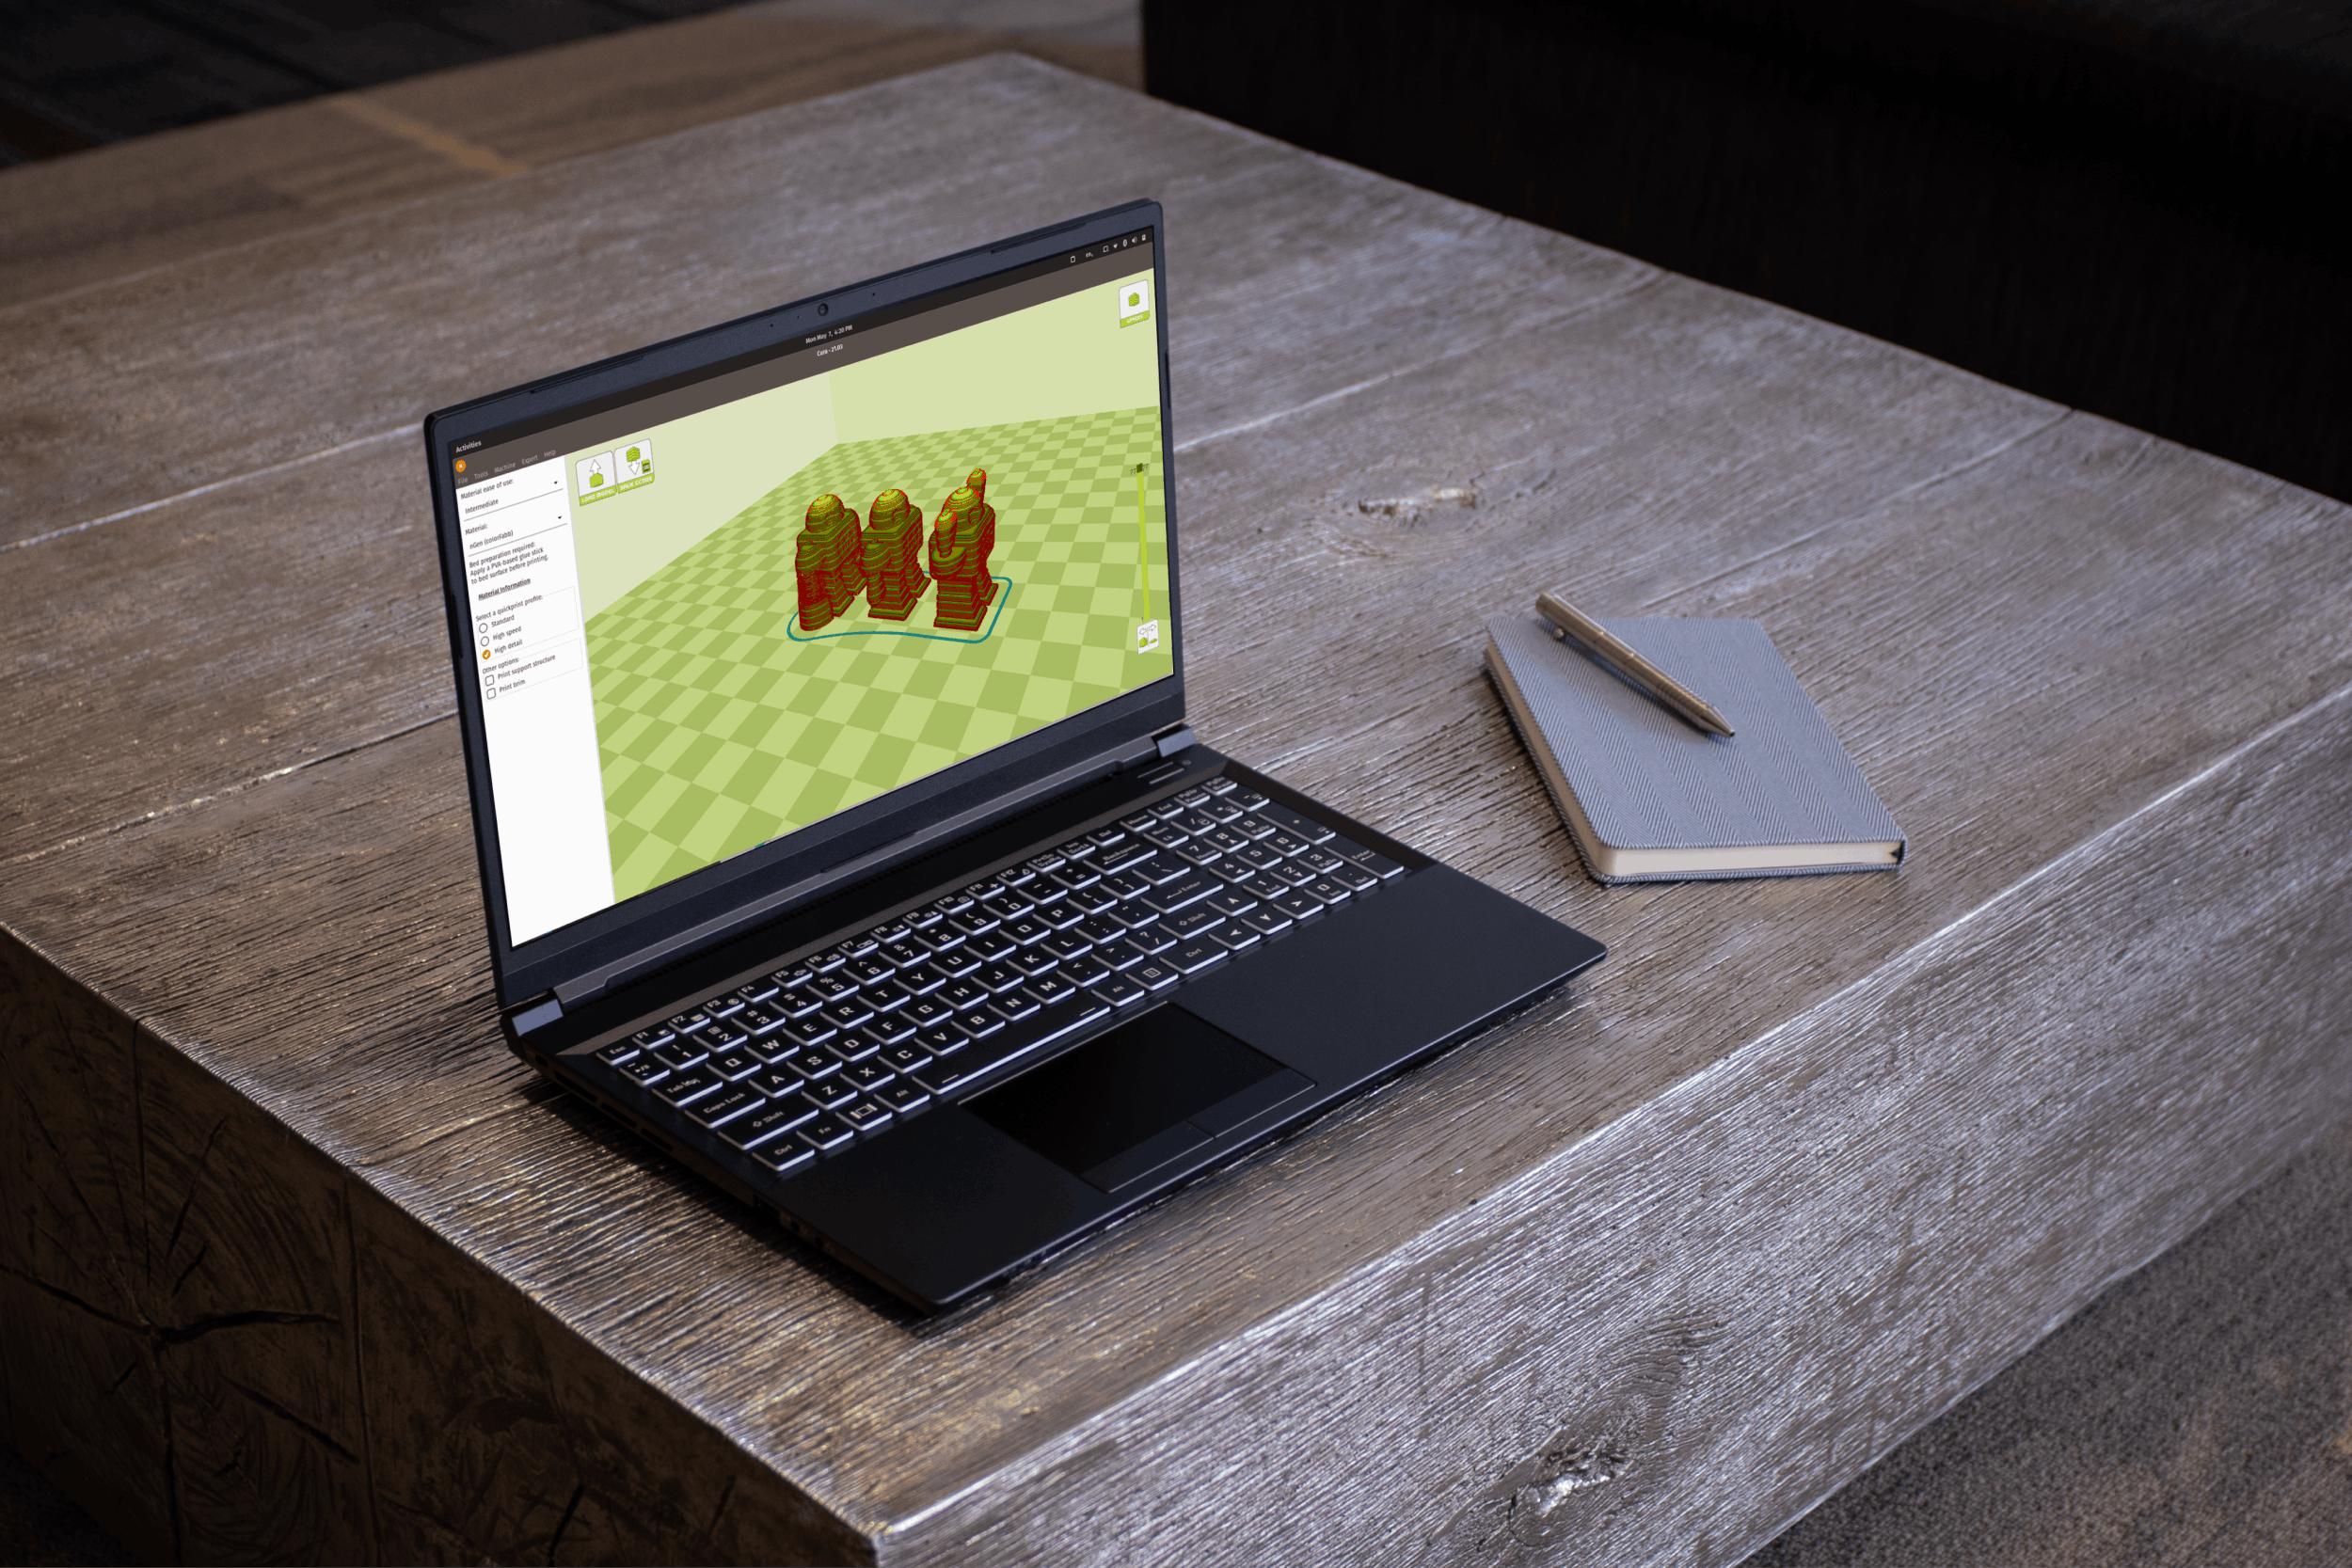 The Oryx Pro laptop showing three excited robots in the 3D-printing software, Cura.